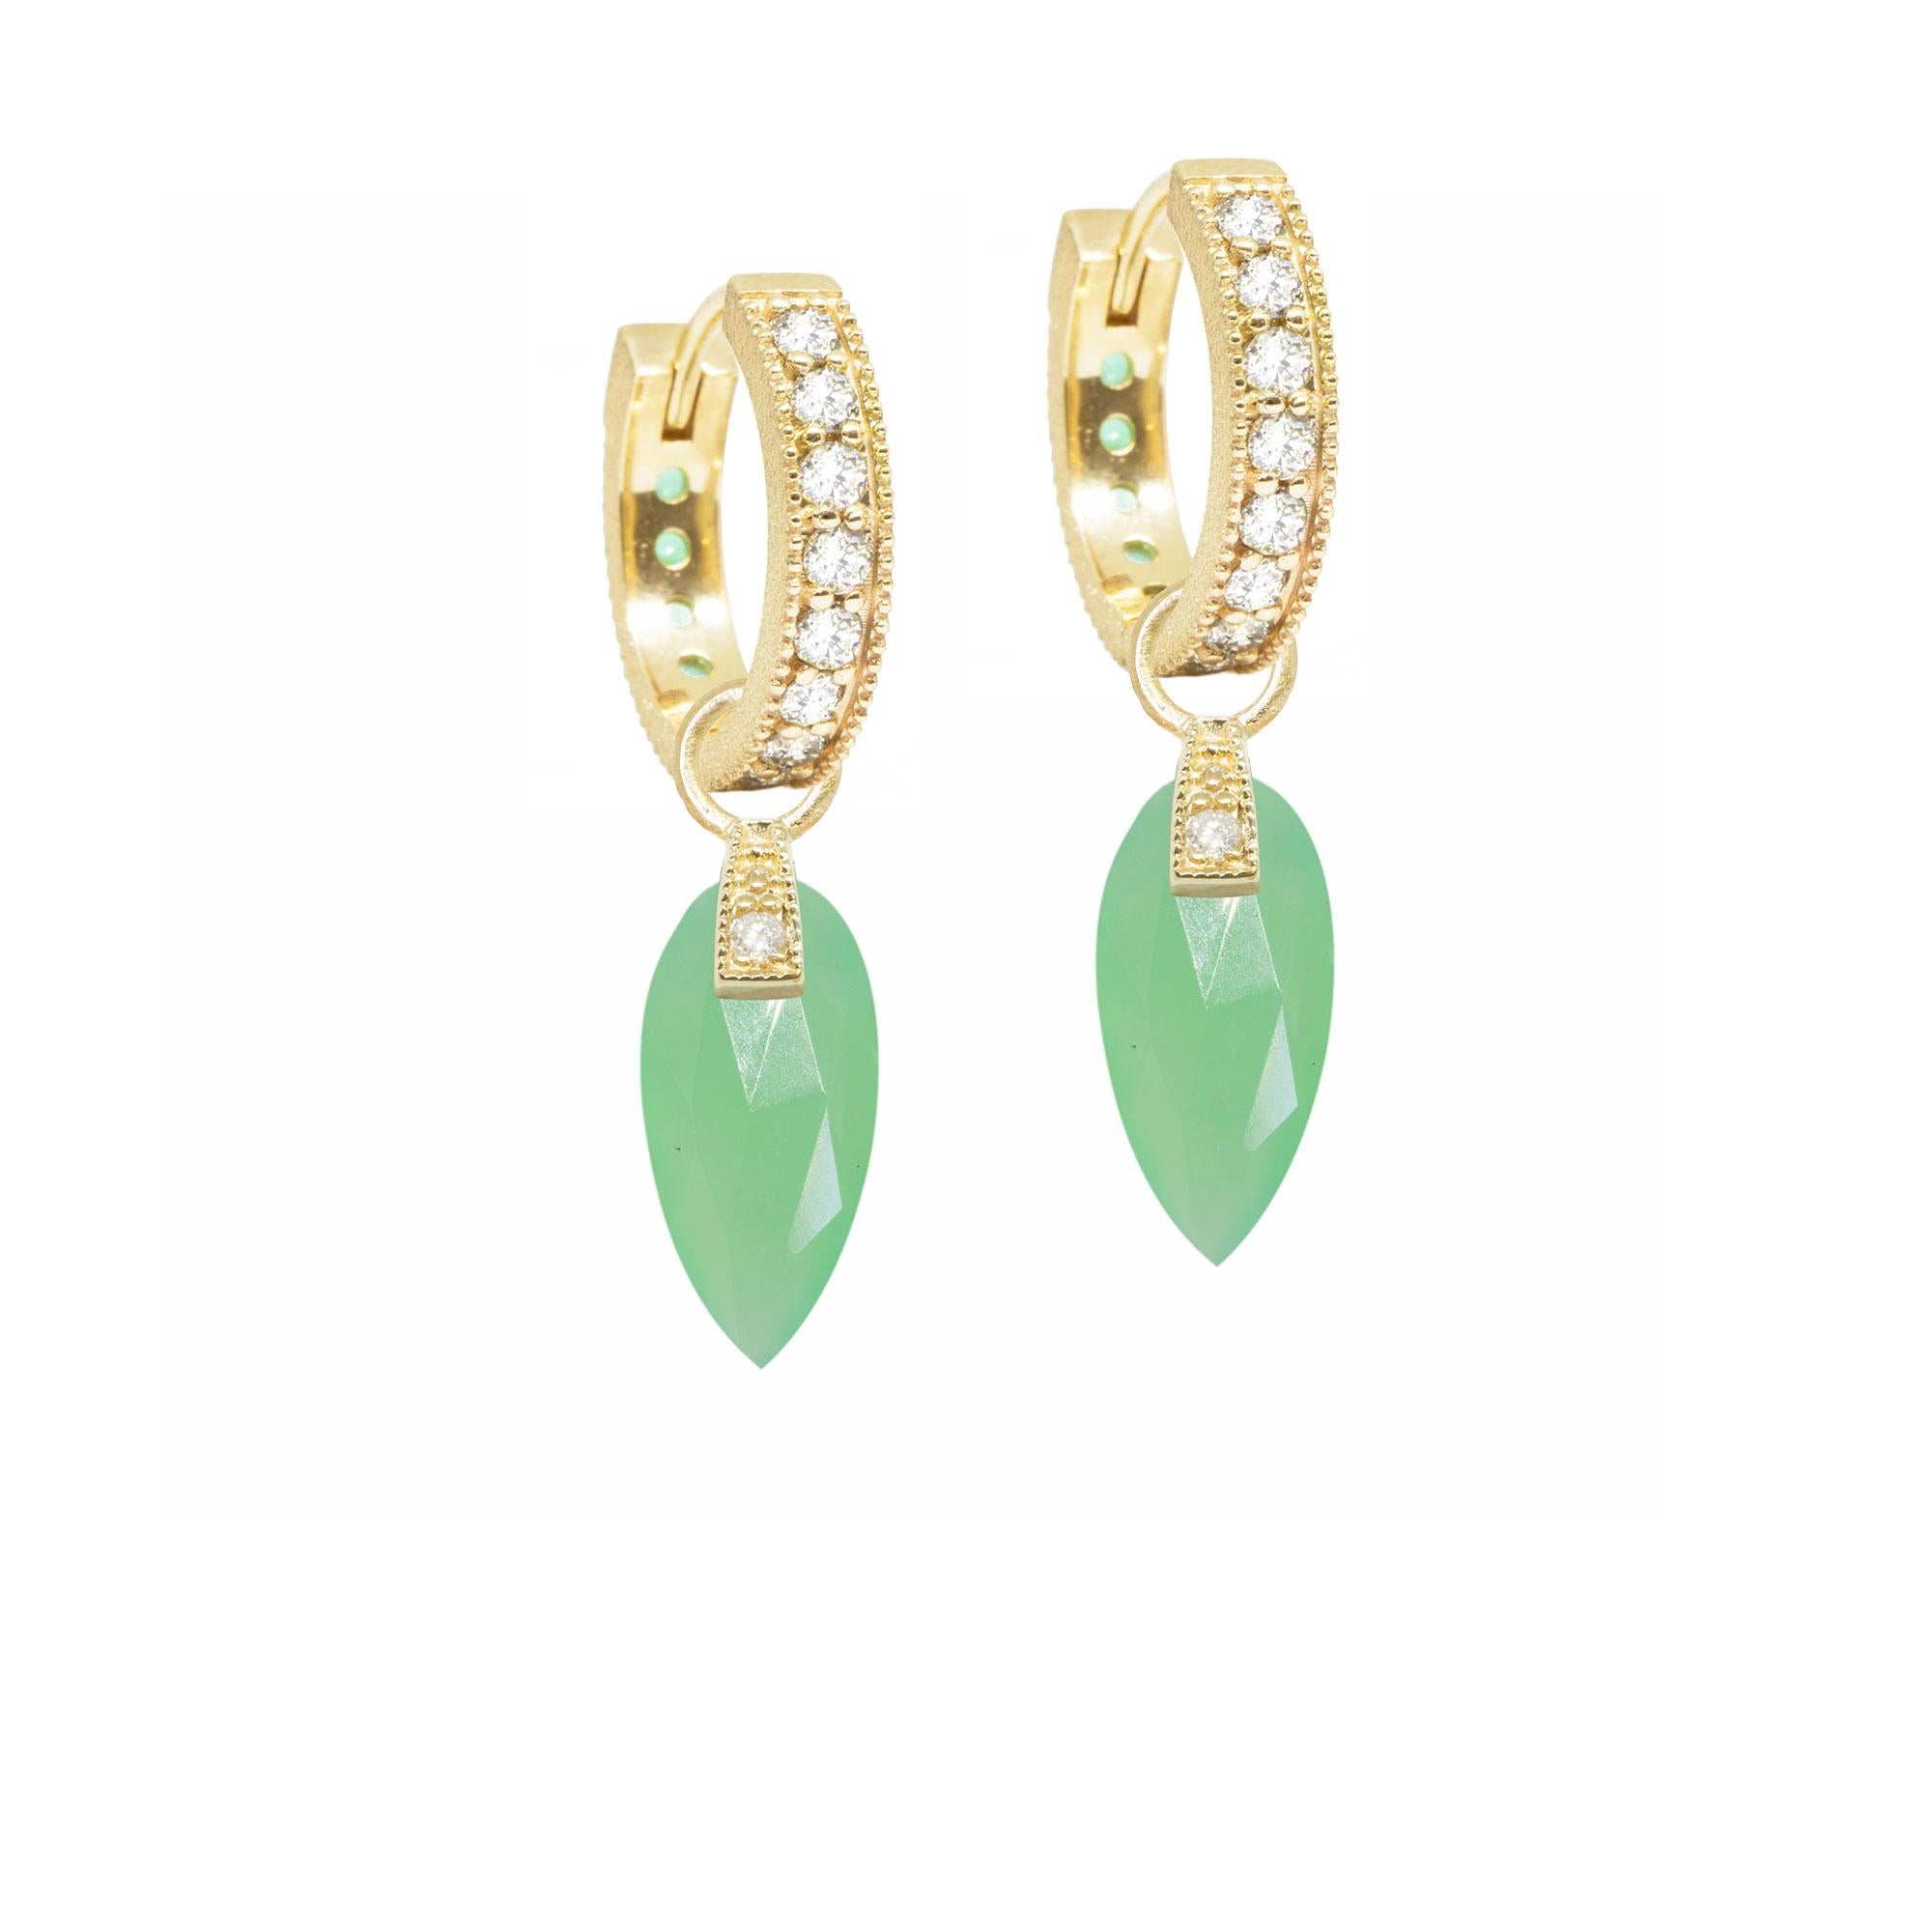 The perfect everyday style, especially when you want a pop of pale blue, the Angel Wings 15mm Gold Charms feature milky chrysoprase drops dangling from a diamond-studded bale.

Nina Nguyen Design's patent-pending earrings have an element on the back